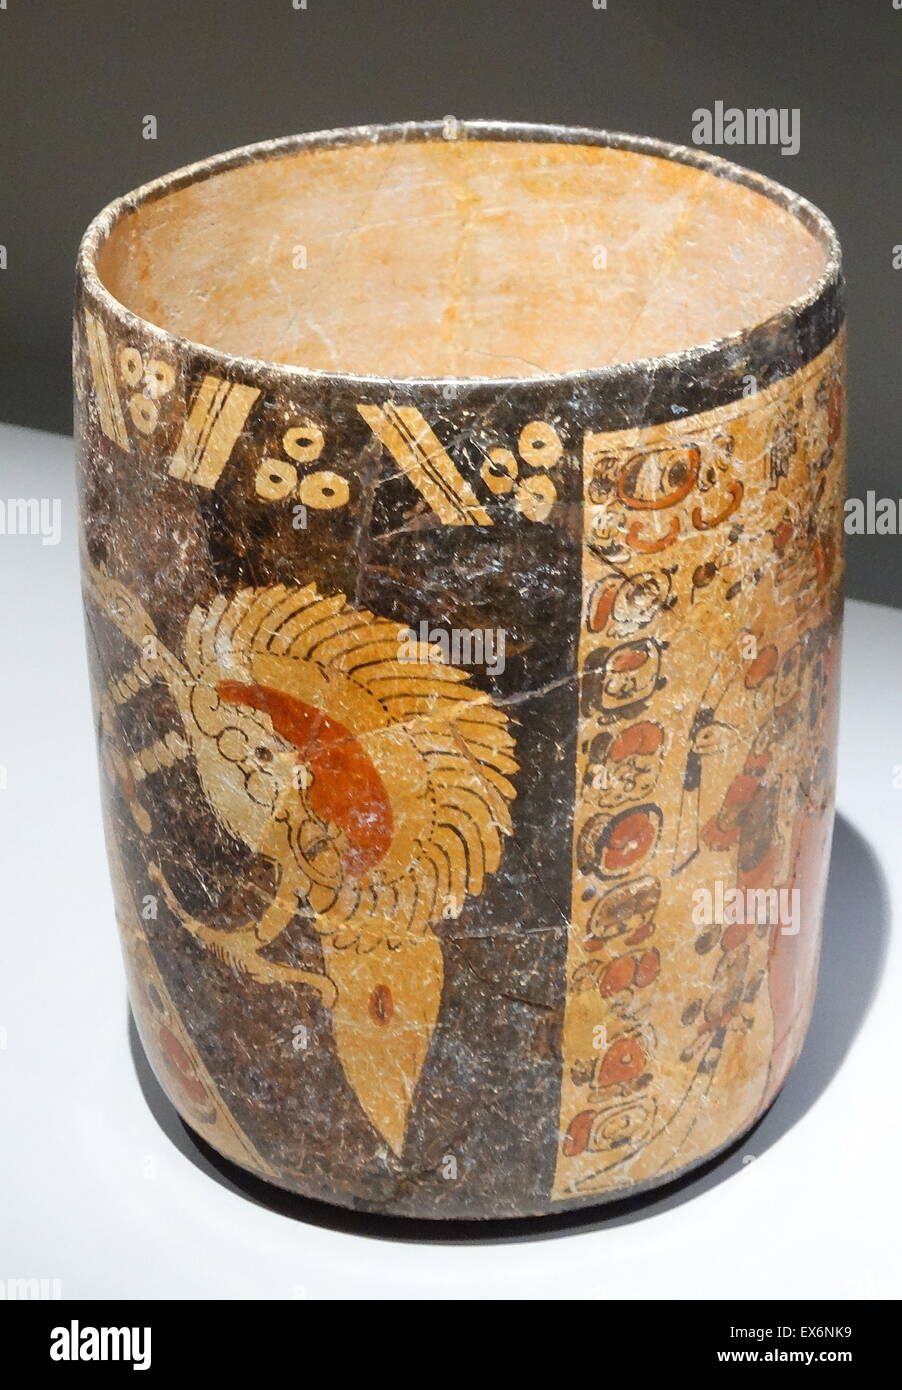 Straight-walled polychrome vase representing a double stage on a light and dark background. The dark background contains a representation of a bird while the light shows a male character richly dressed and standing beside a column and a band of decorative Stock Photo